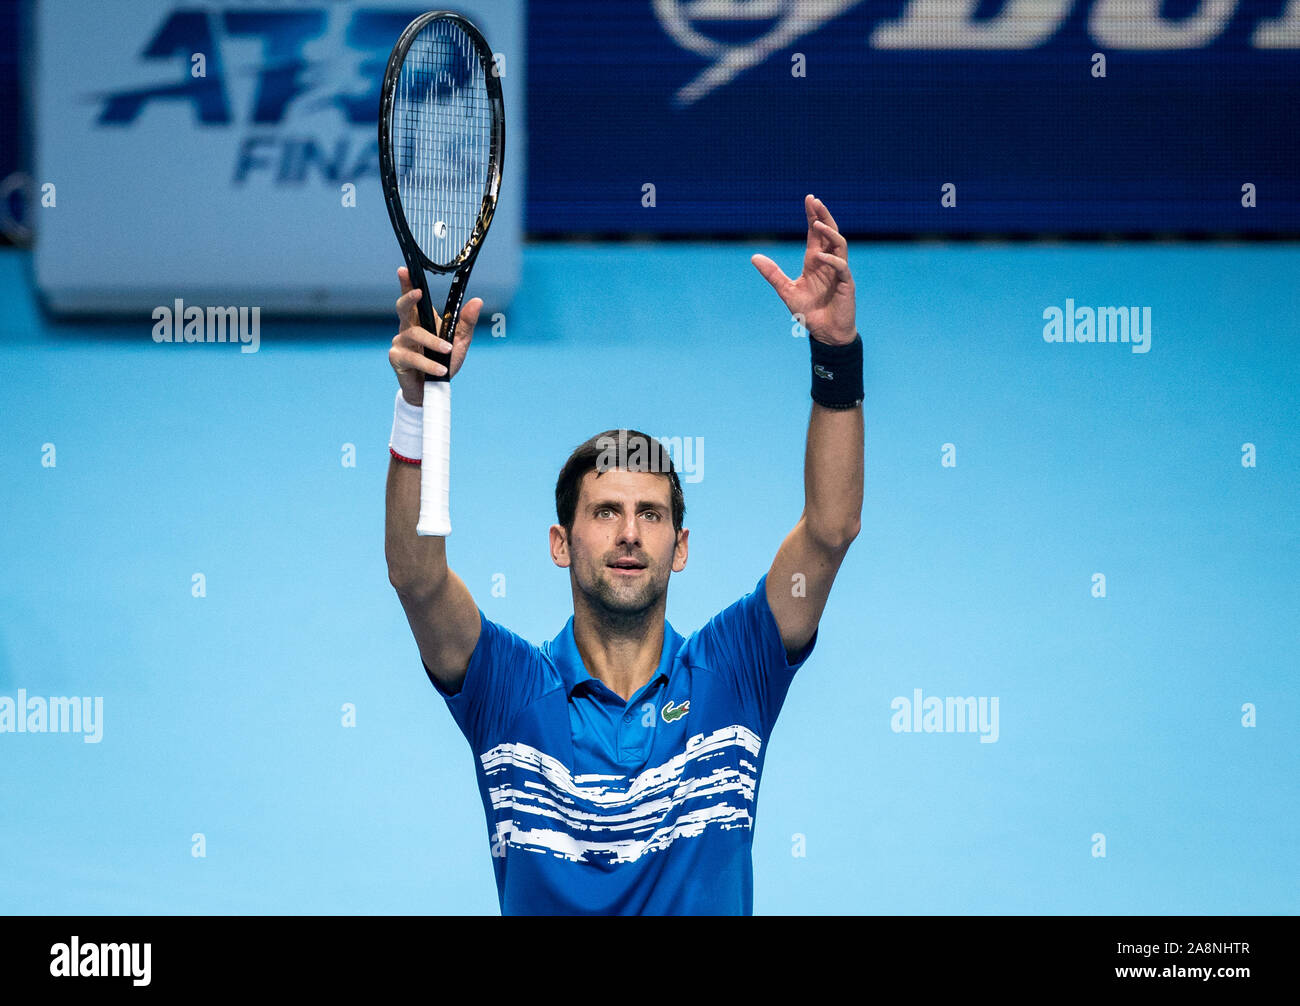 London, UK. 10th Nov, 2019. Novak DJOKOVIC (Serbia) celebrates his win over  Matteo BERRETTINI (Italy) in the first group match during the Nitto ATP  Tennis Finals London at The O2, London, England